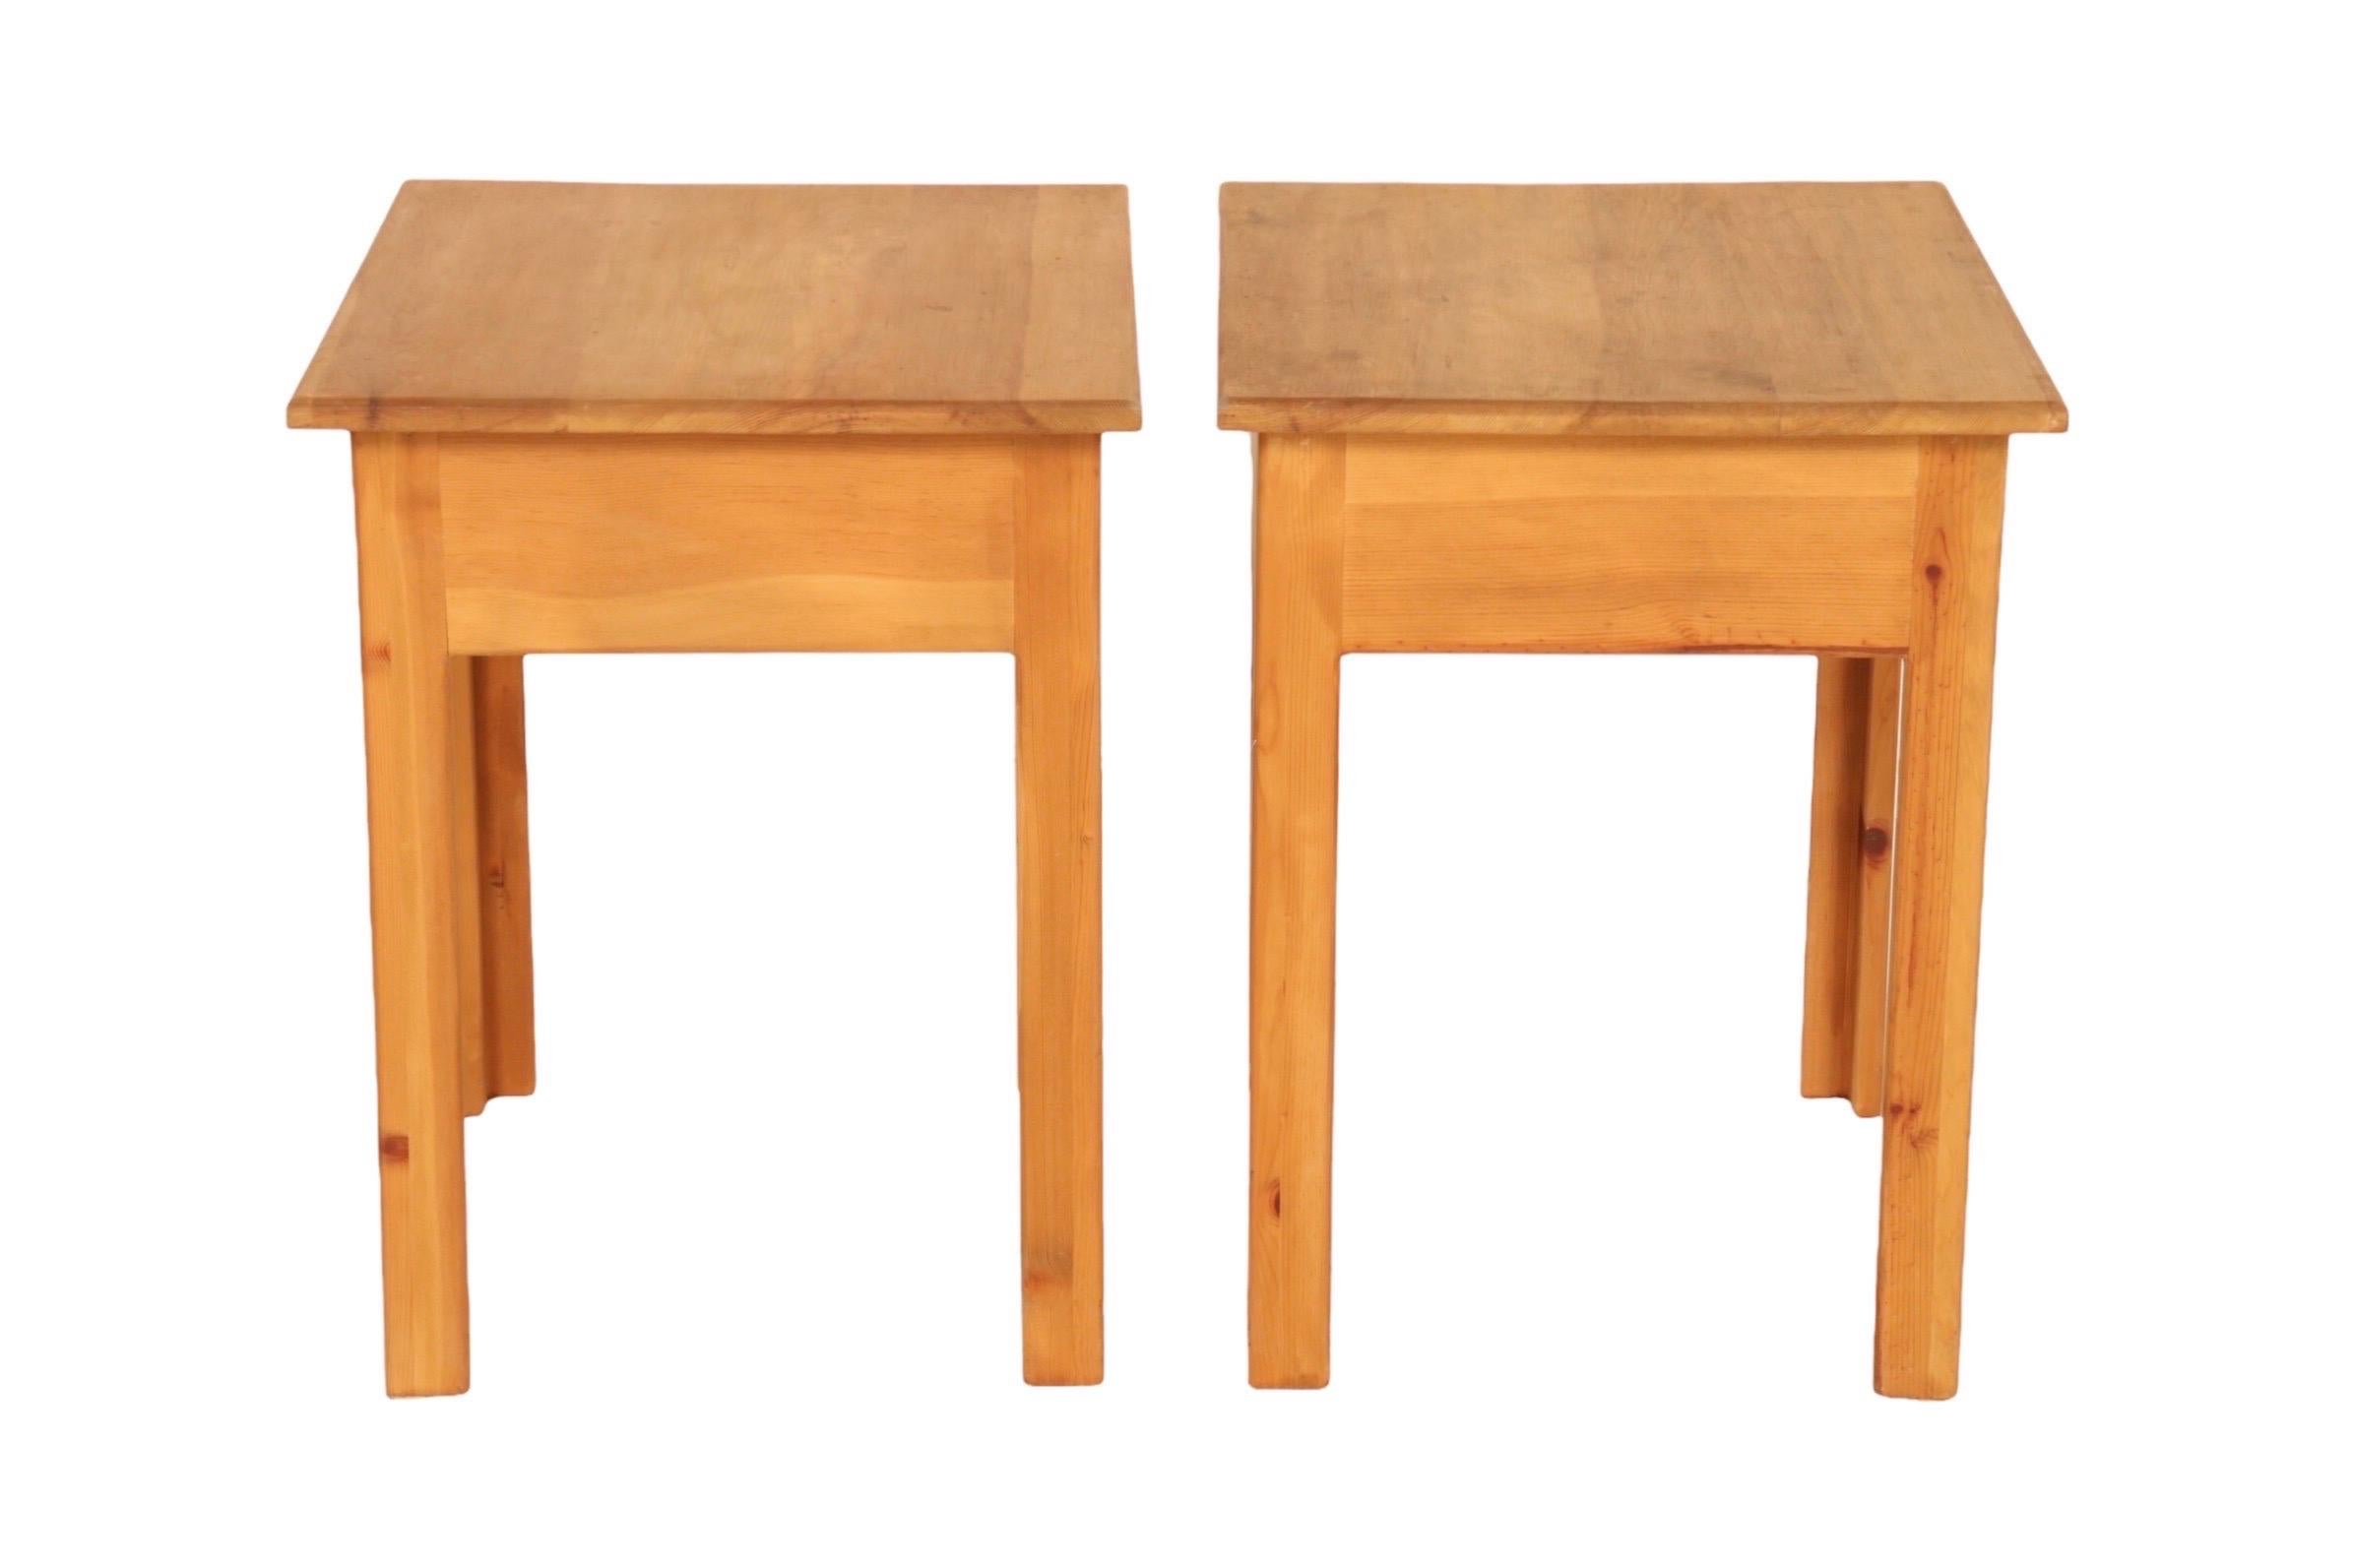 Wood Craftsman Pine Side Tables, a Pair